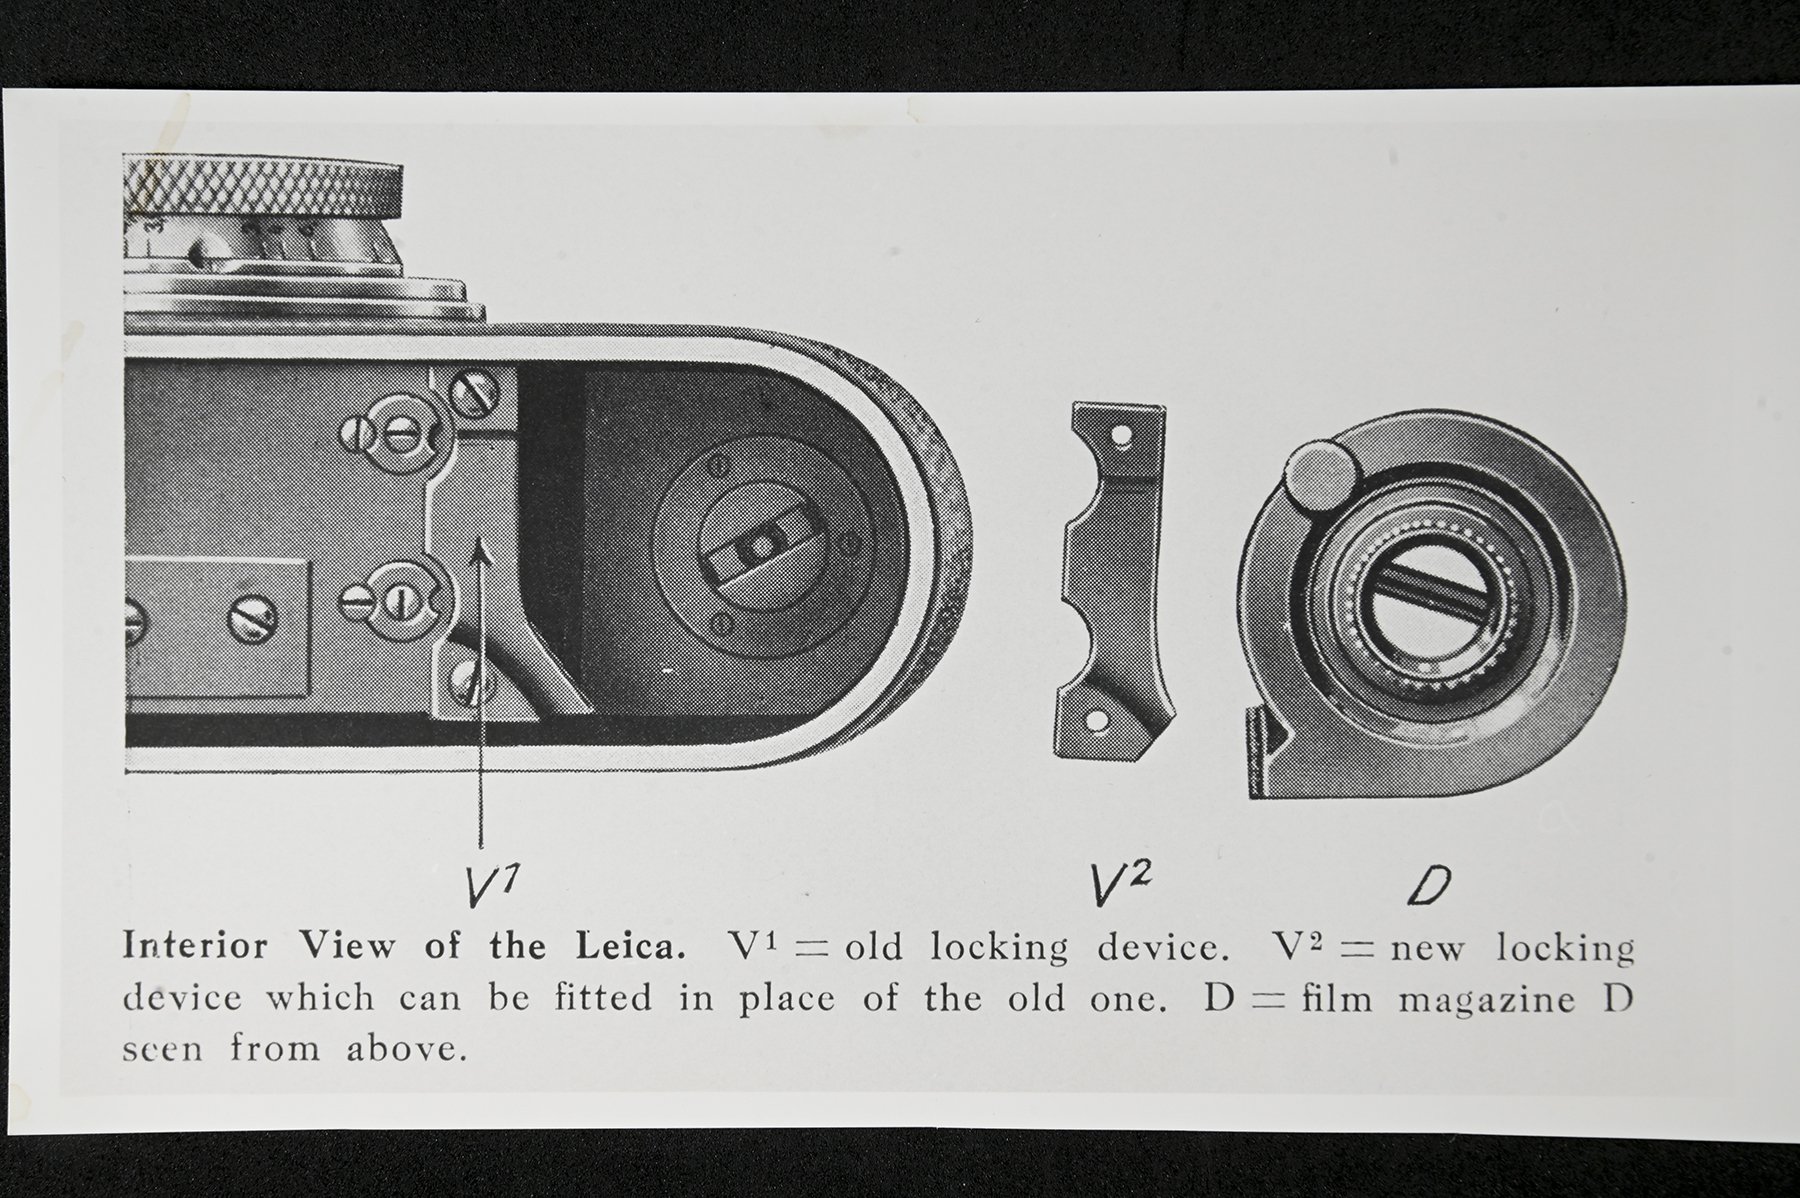 Interior view of early Leica II (Model D)